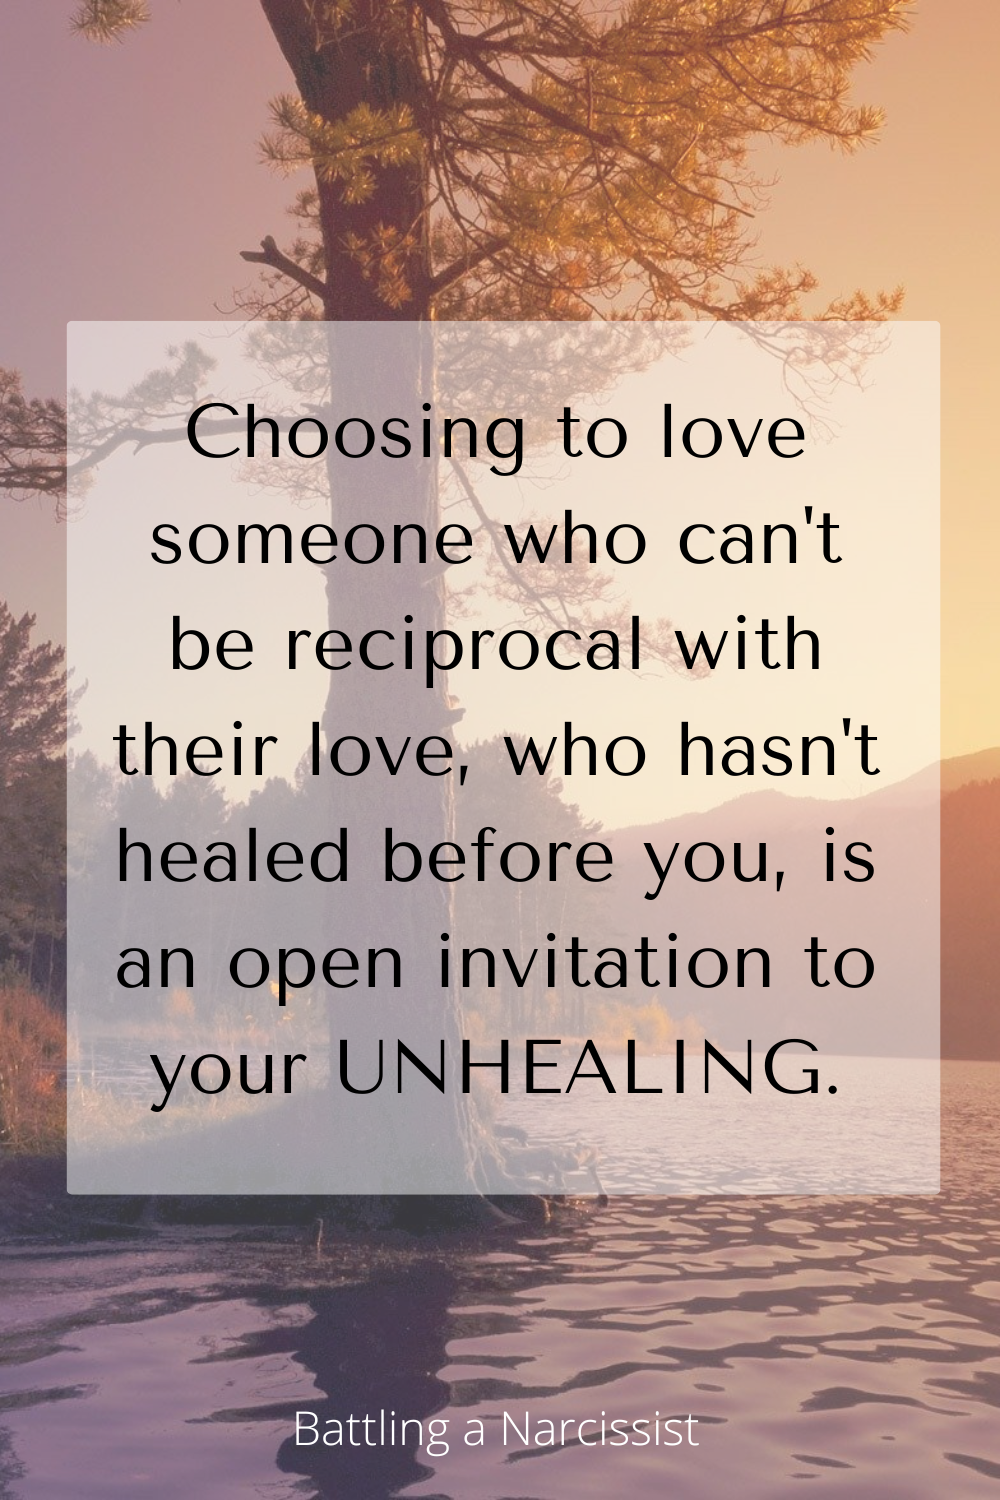 Choosing to love someone who can't be reciprocal with their love, who hasn't healed before you, is an open invitation to your UNHEALING.